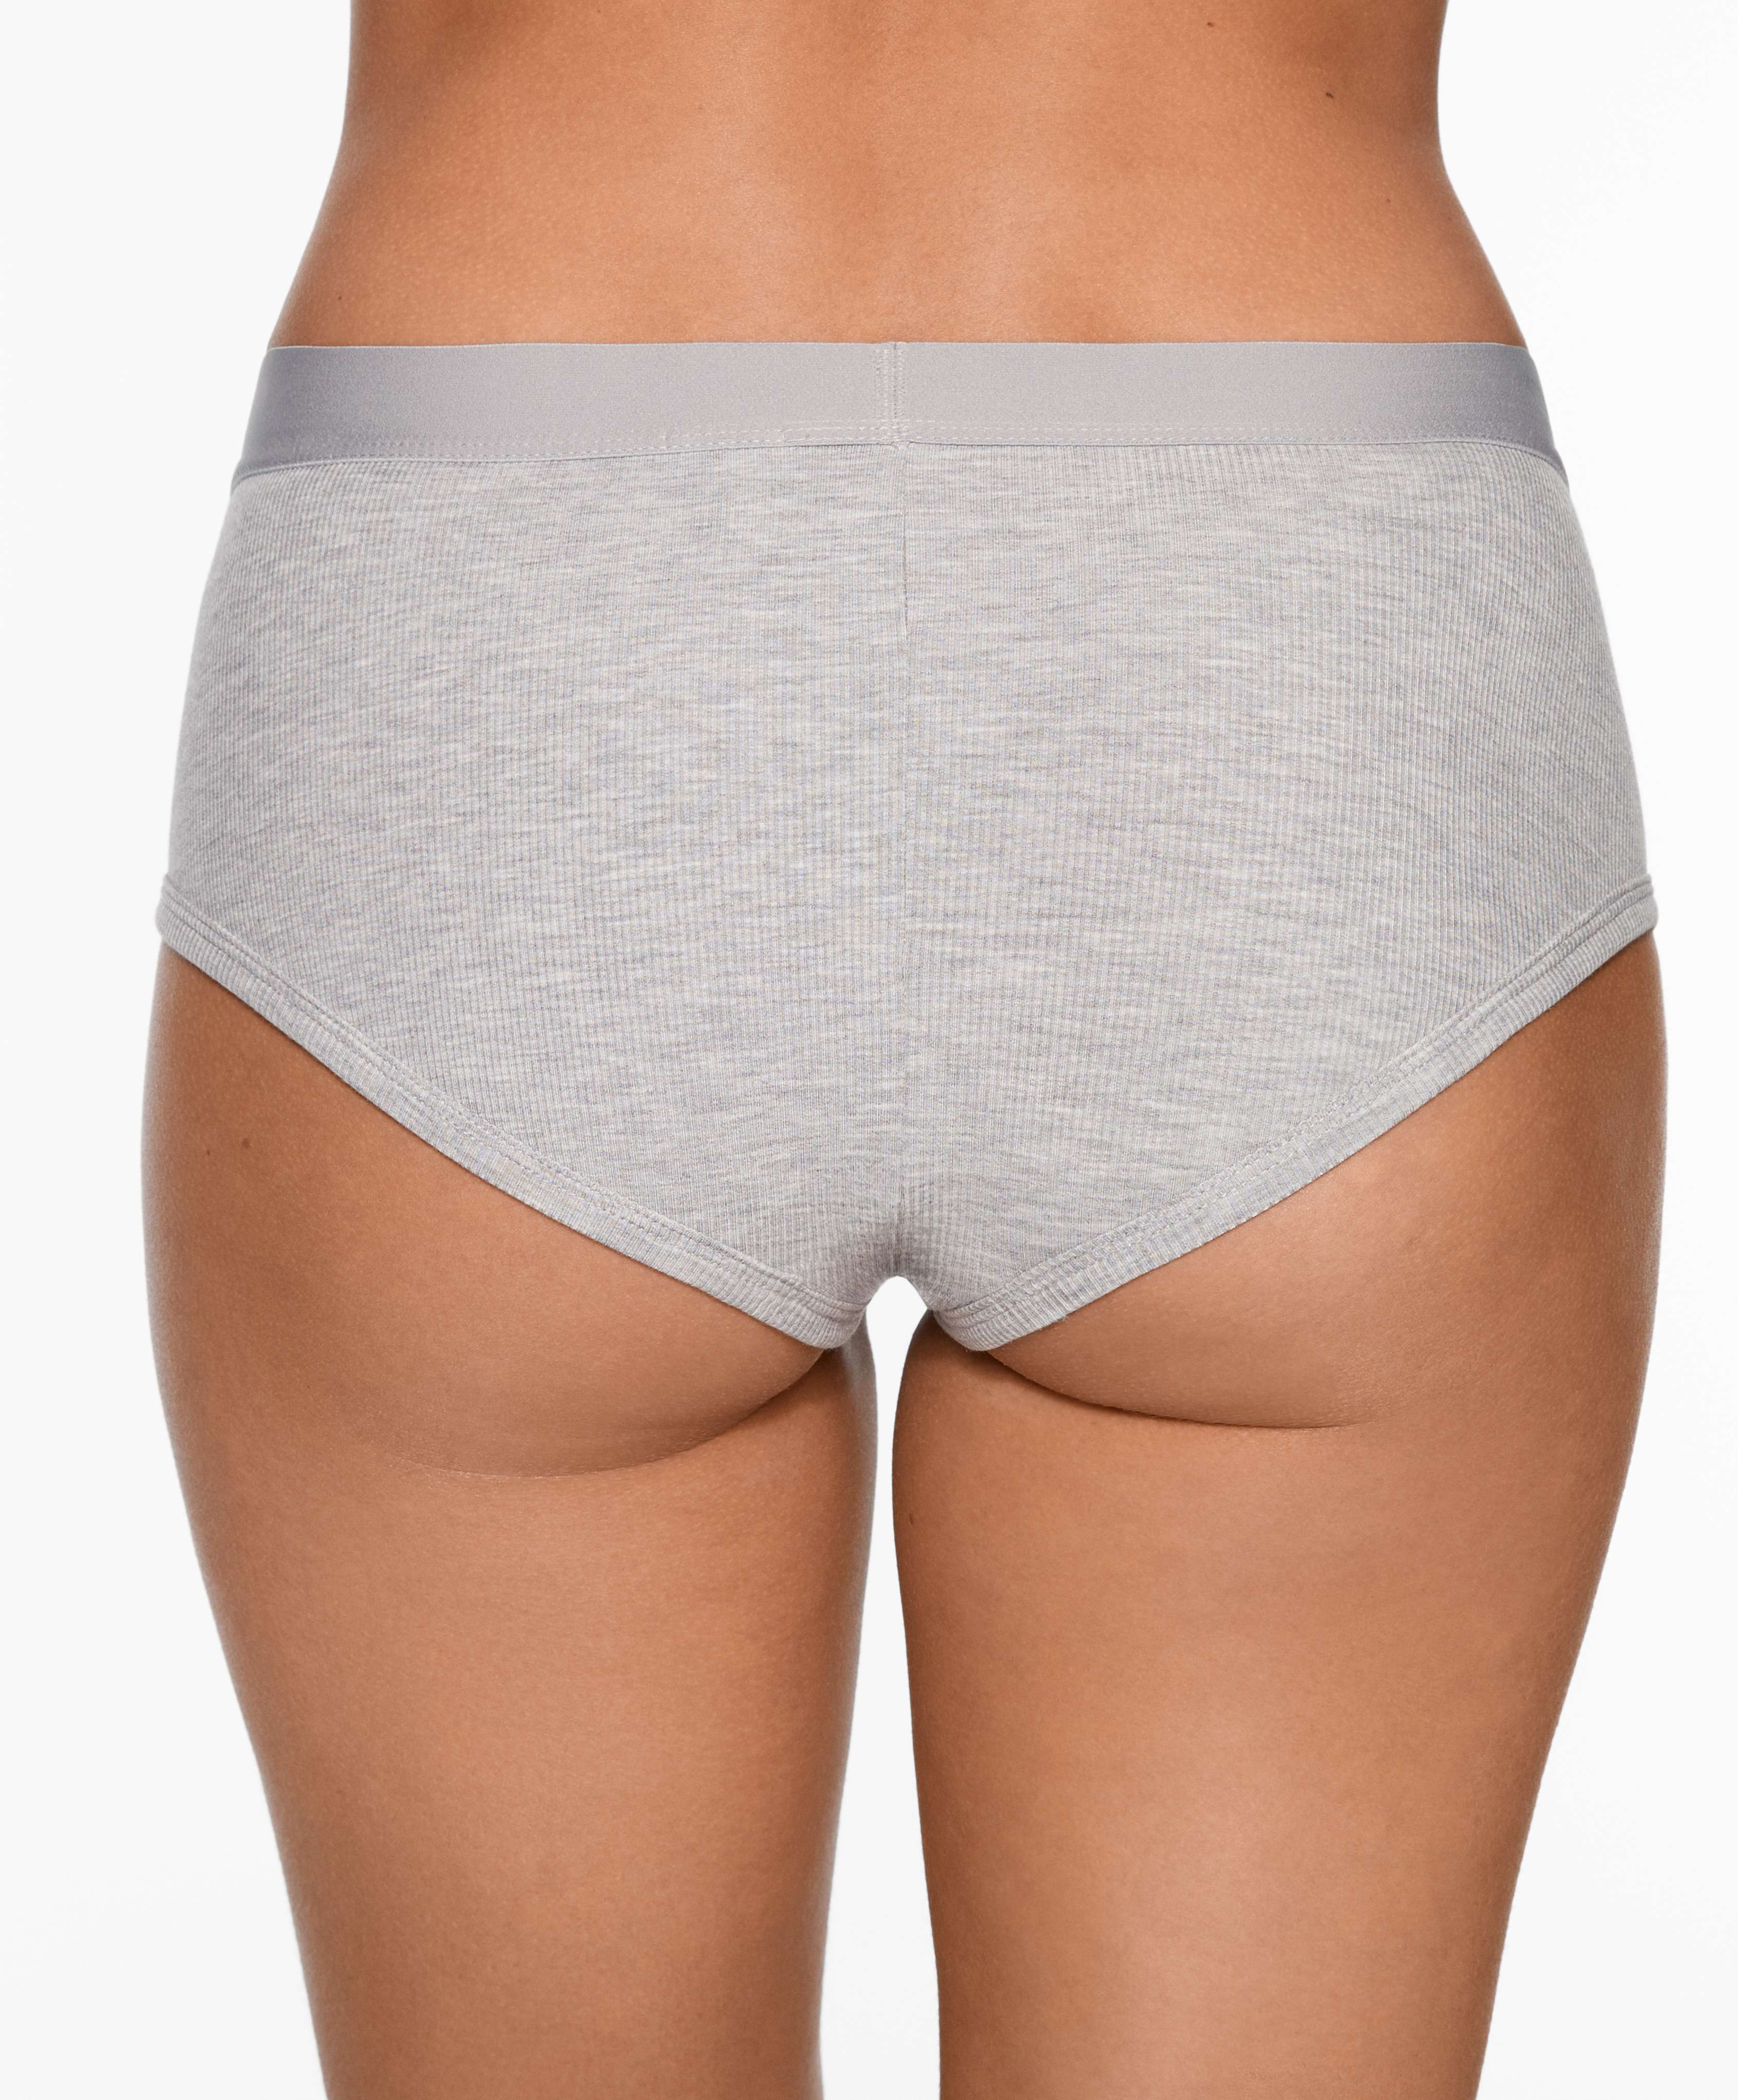 Culotte briefs in a modal blend fabric with rib texture. Elastic waistband with logo detail.